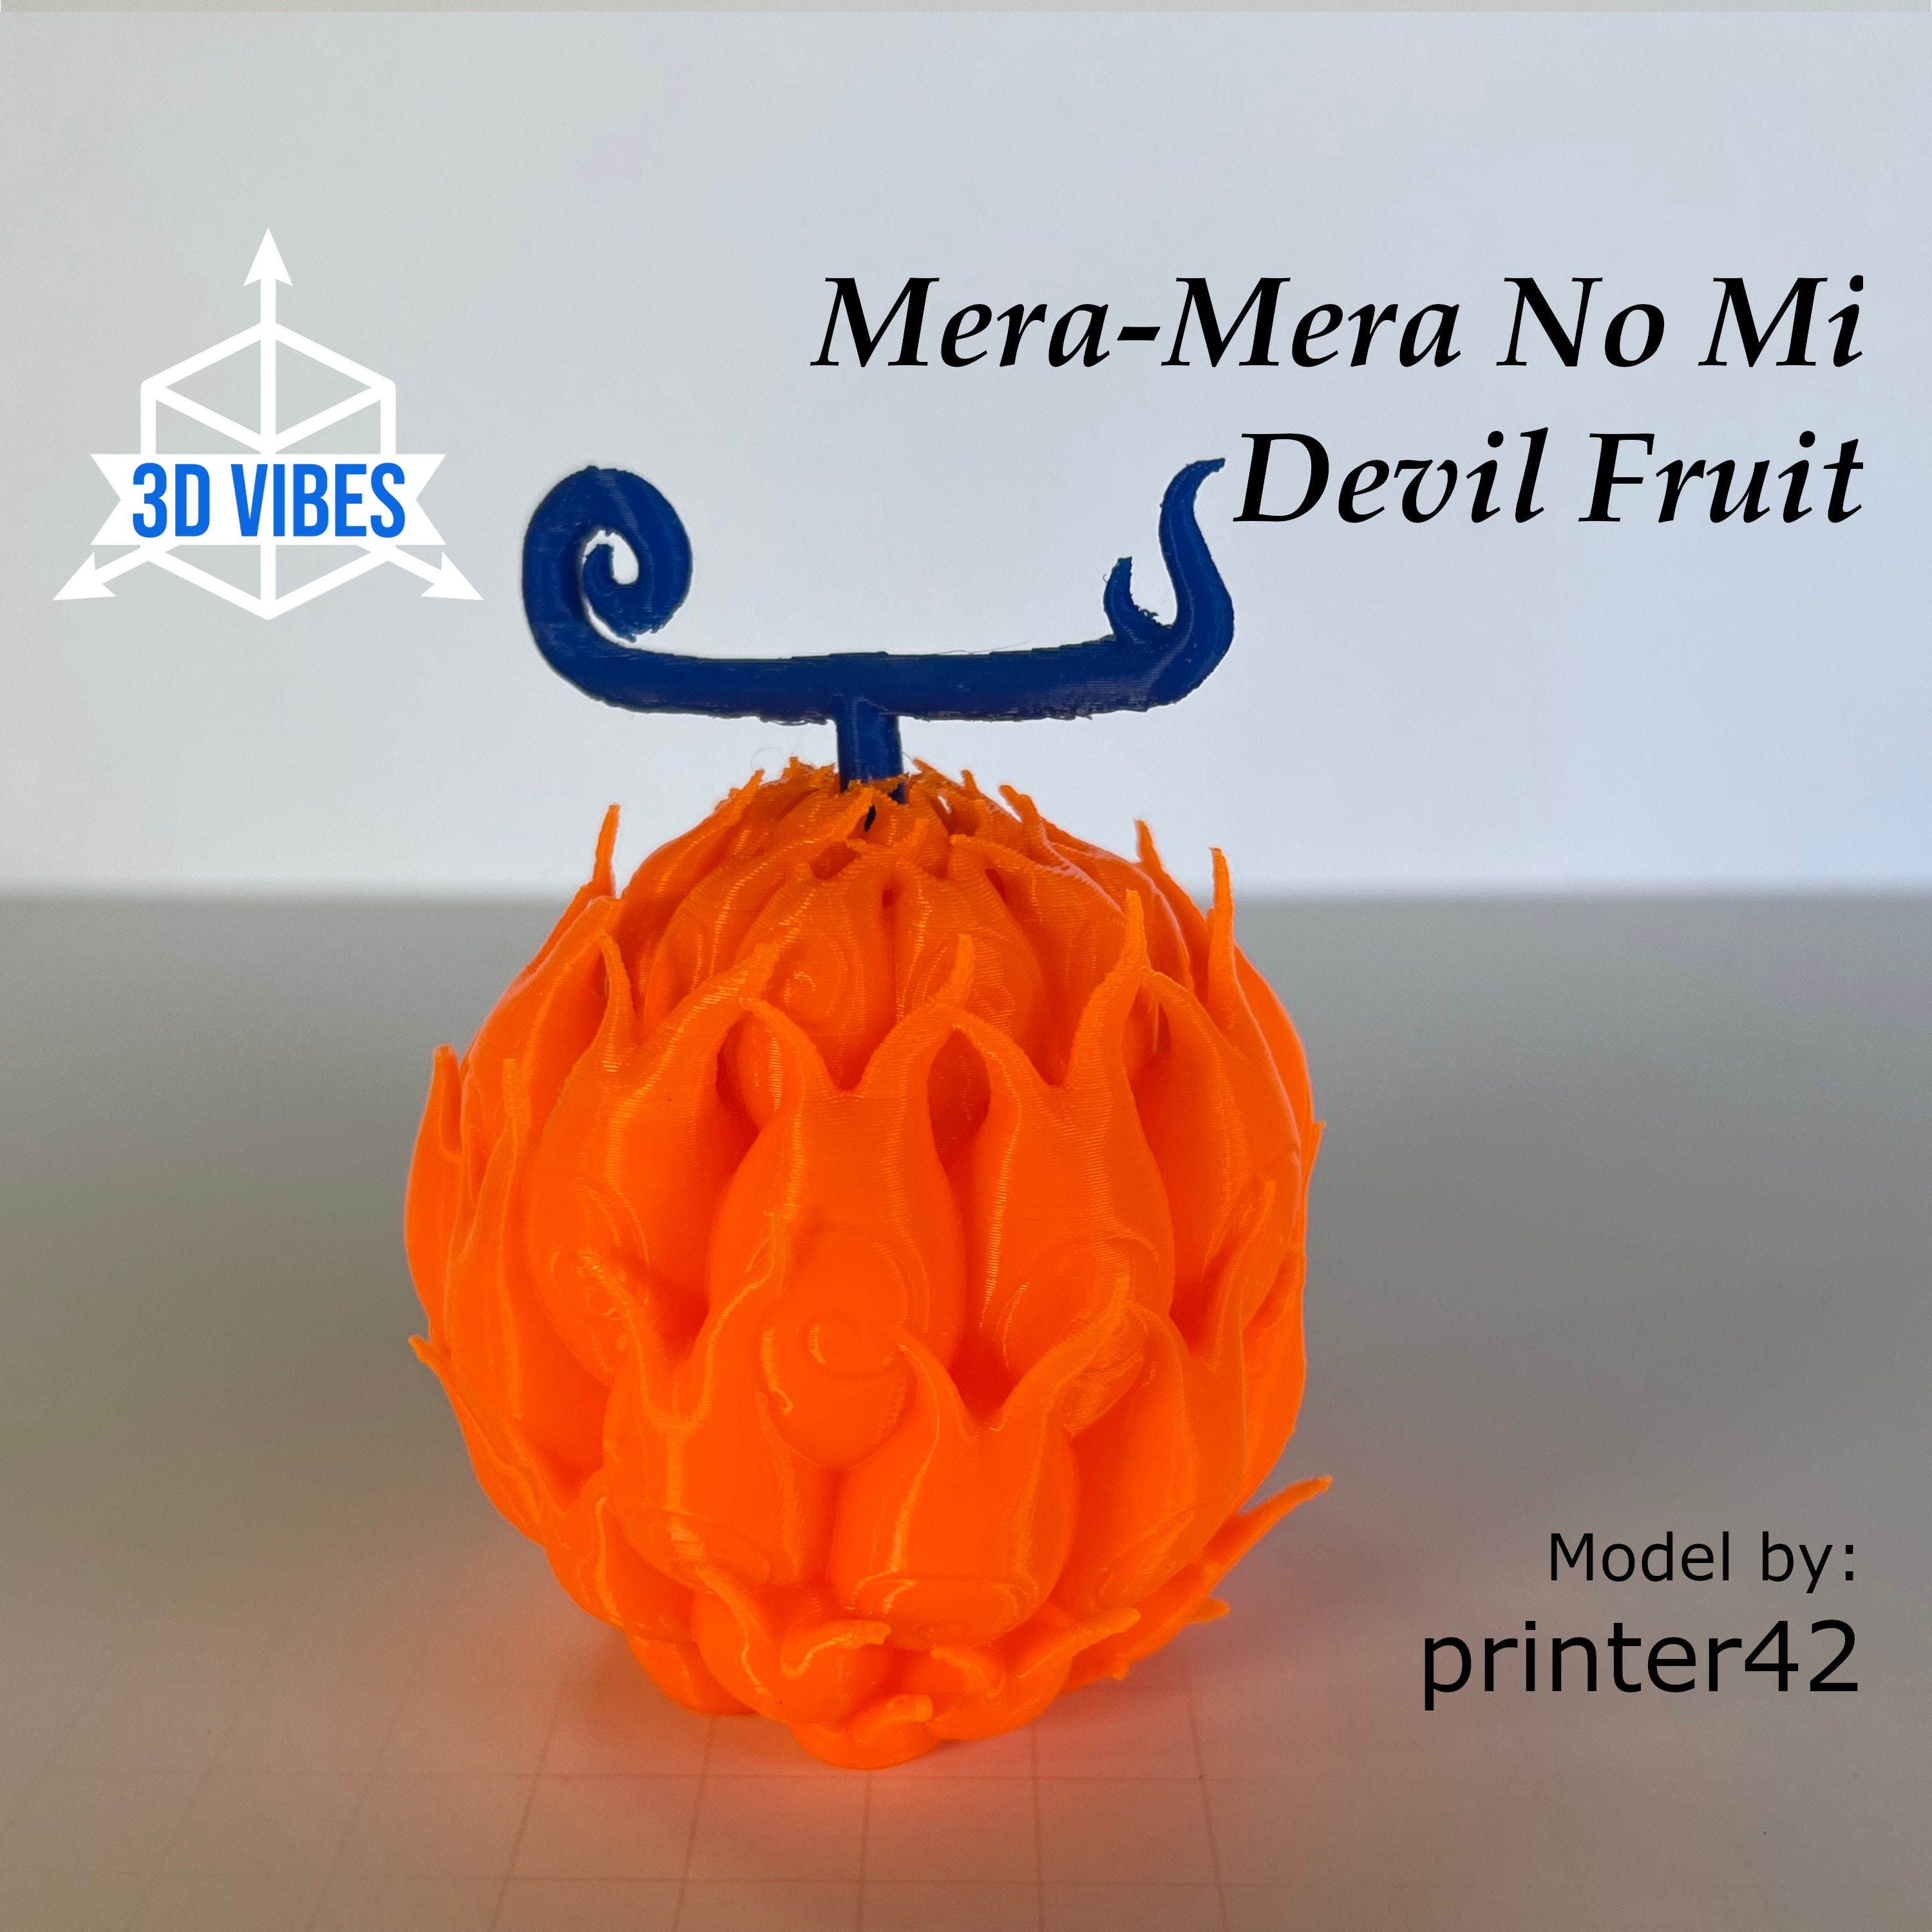 How to Make the Devil Fruit Mera Mera No Mi : 6 Steps (with Pictures) -  Instructables